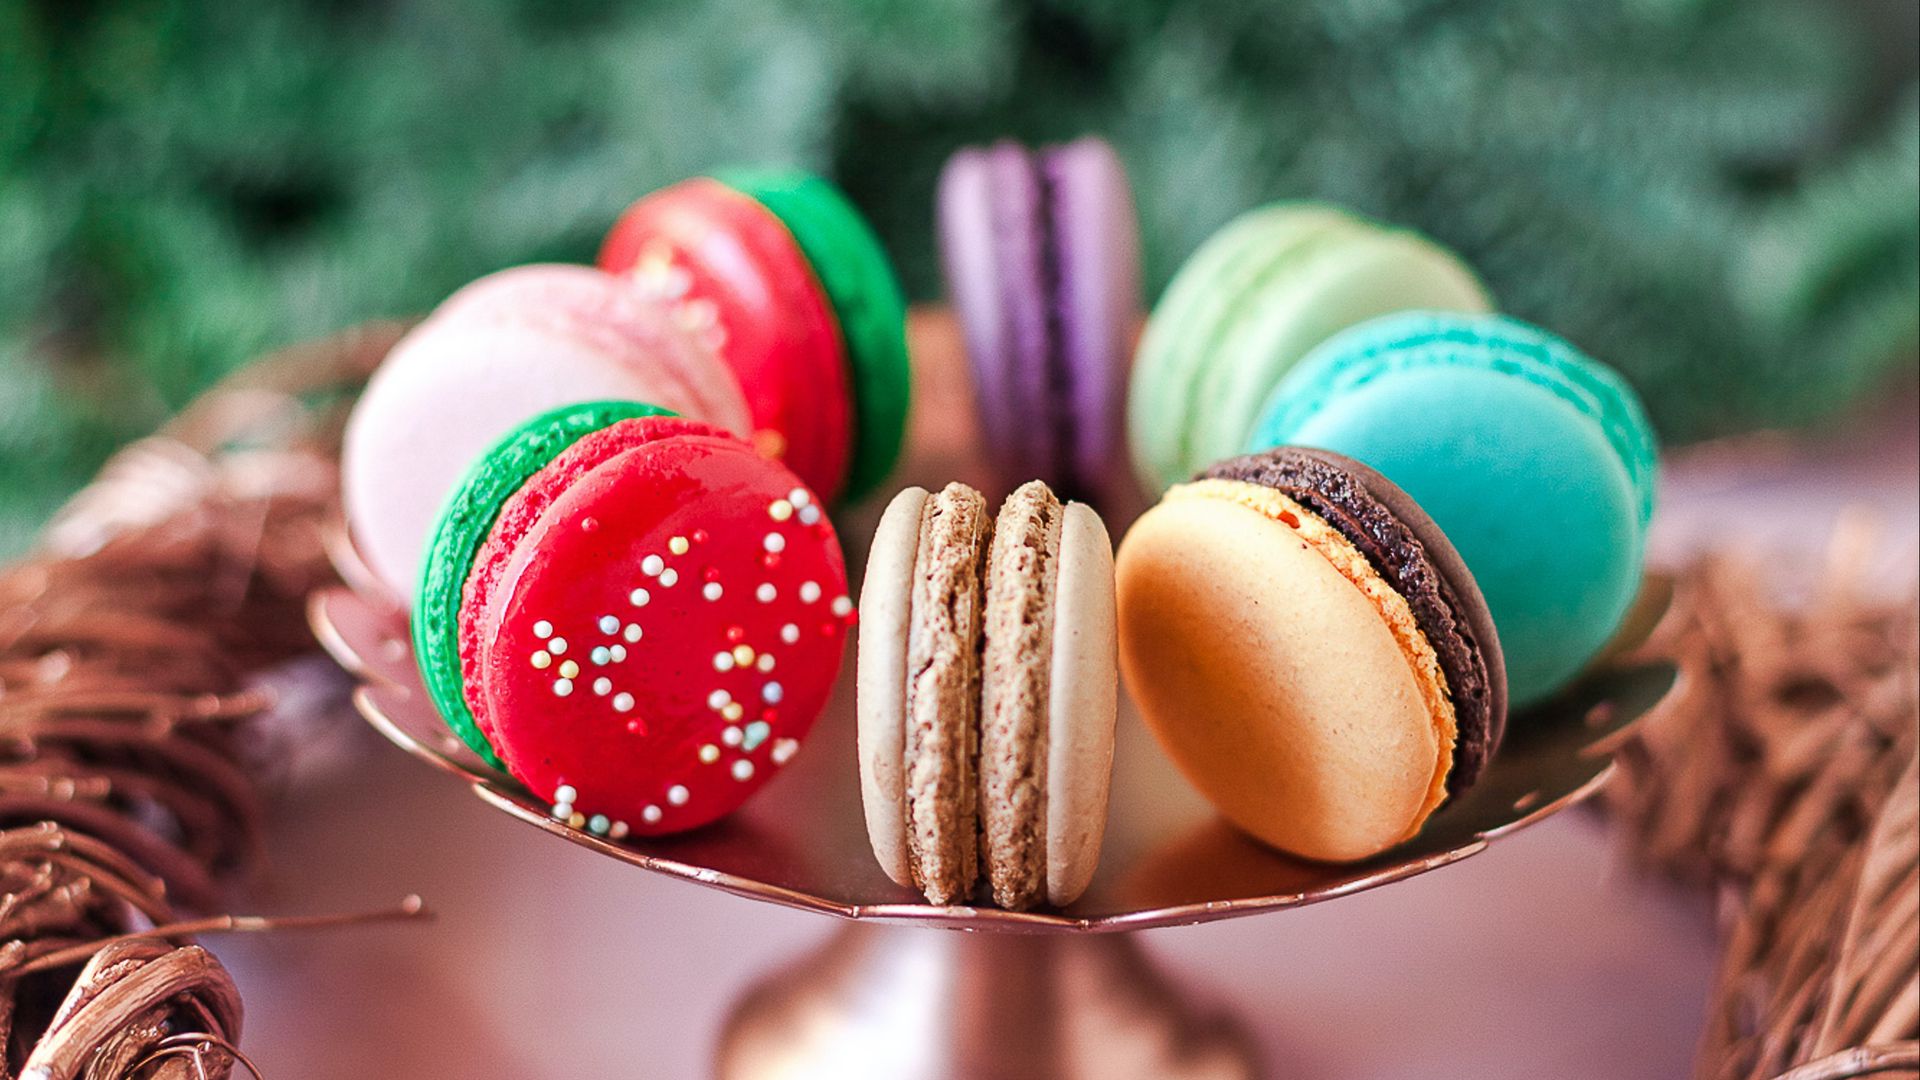 Download wallpaper 1920x1080 macarons, cookies, colorful, dessert full hd,  hdtv, fhd, 1080p hd background